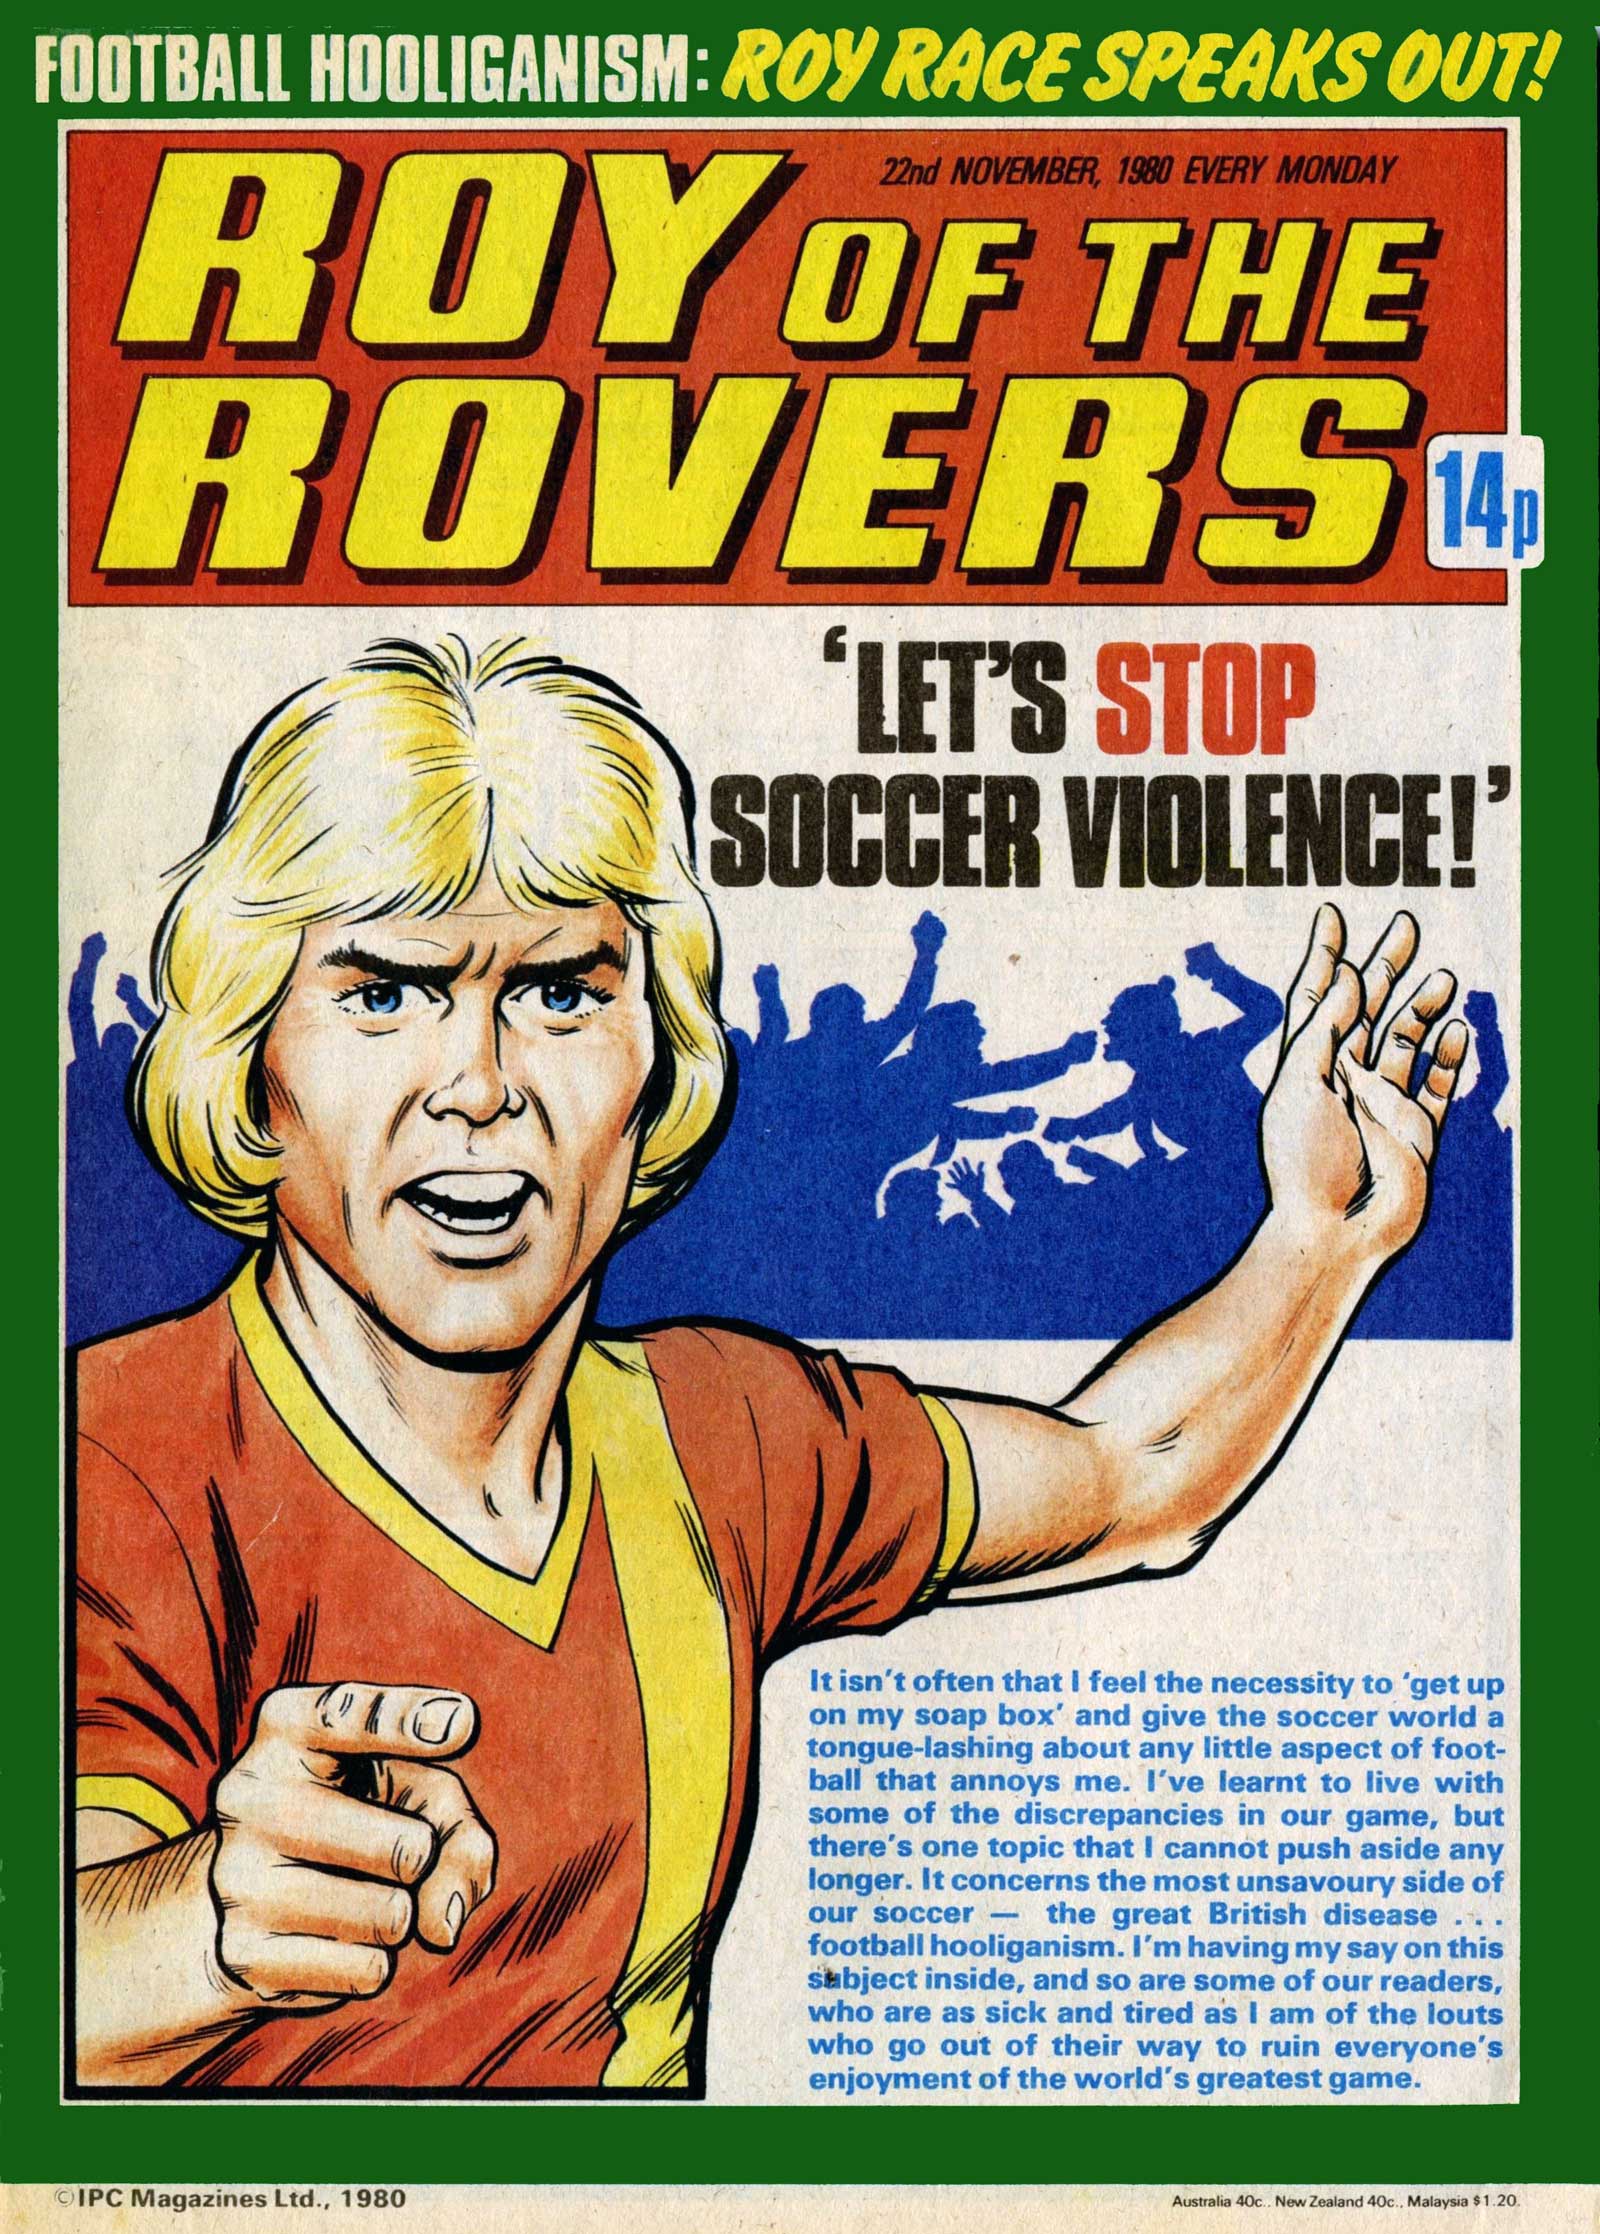 Roy of the Rovers, cover date 22nd November 1980. A cover exemplifying much of what Roy stood for